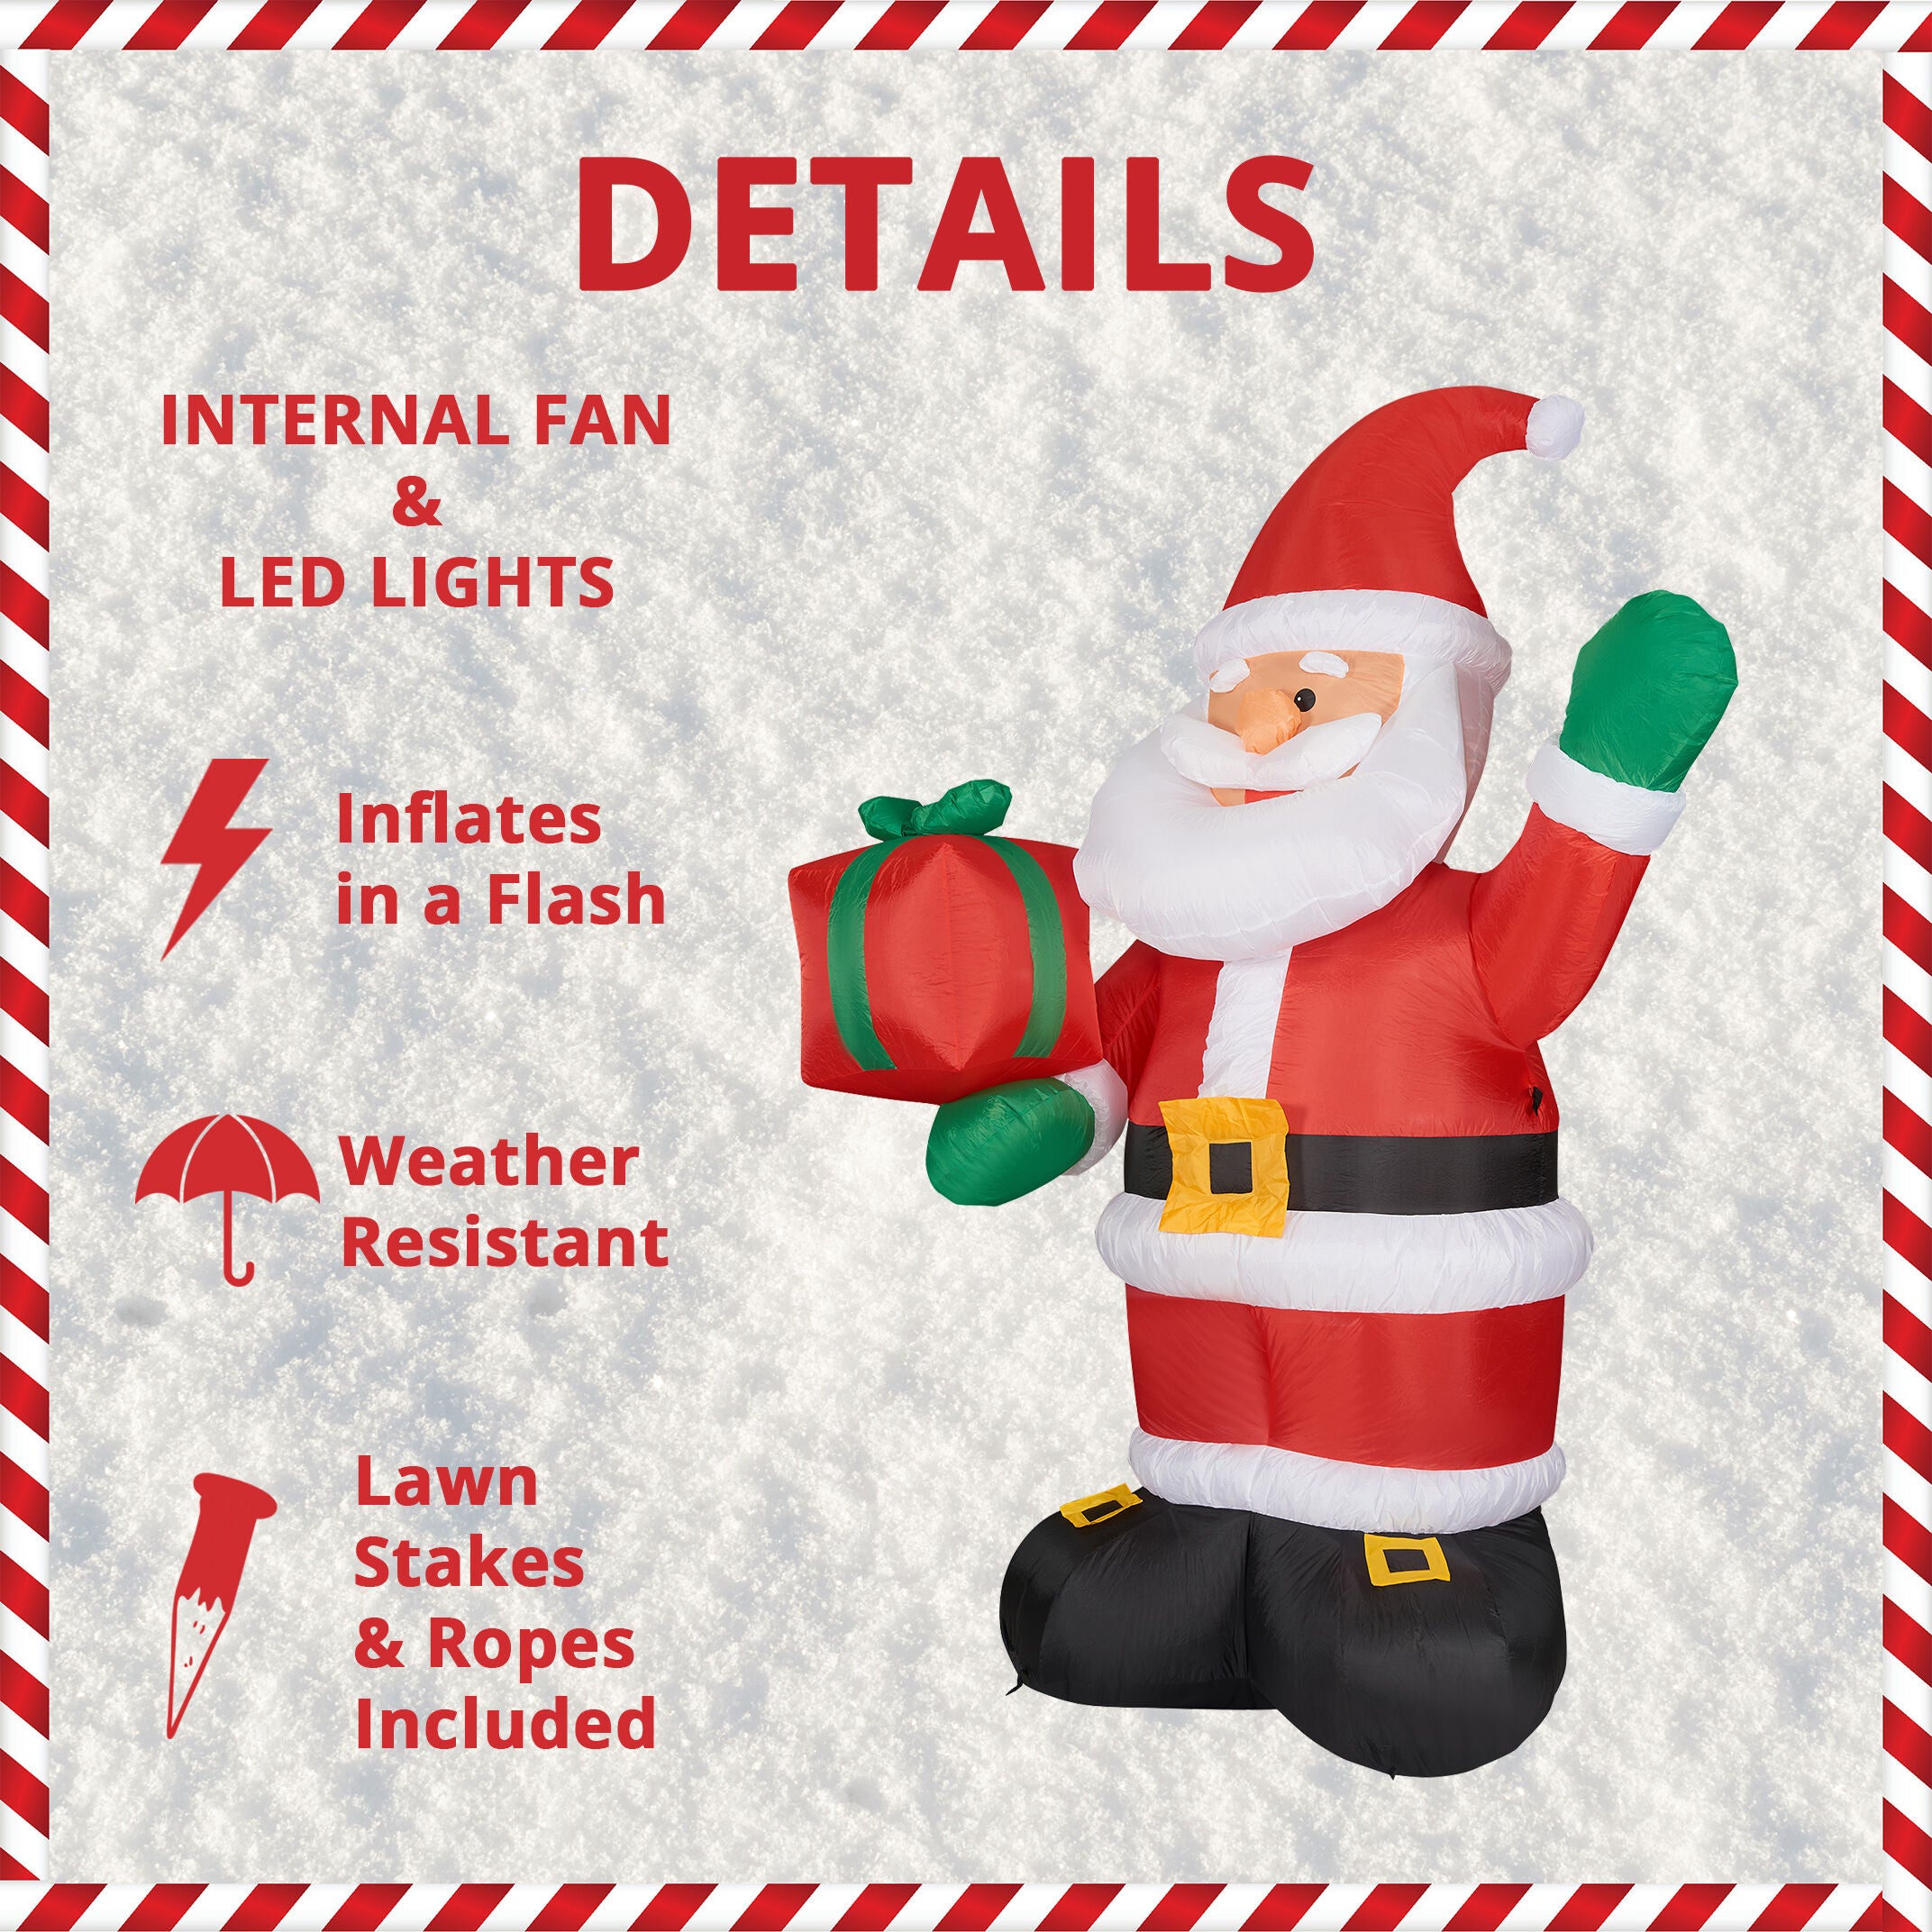 Fraser Hill Farm -  10-Ft. Tall Santa Claus Holding Gift, Outdoor Blow-Up Christmas Inflatable with Lights and Storage Bag